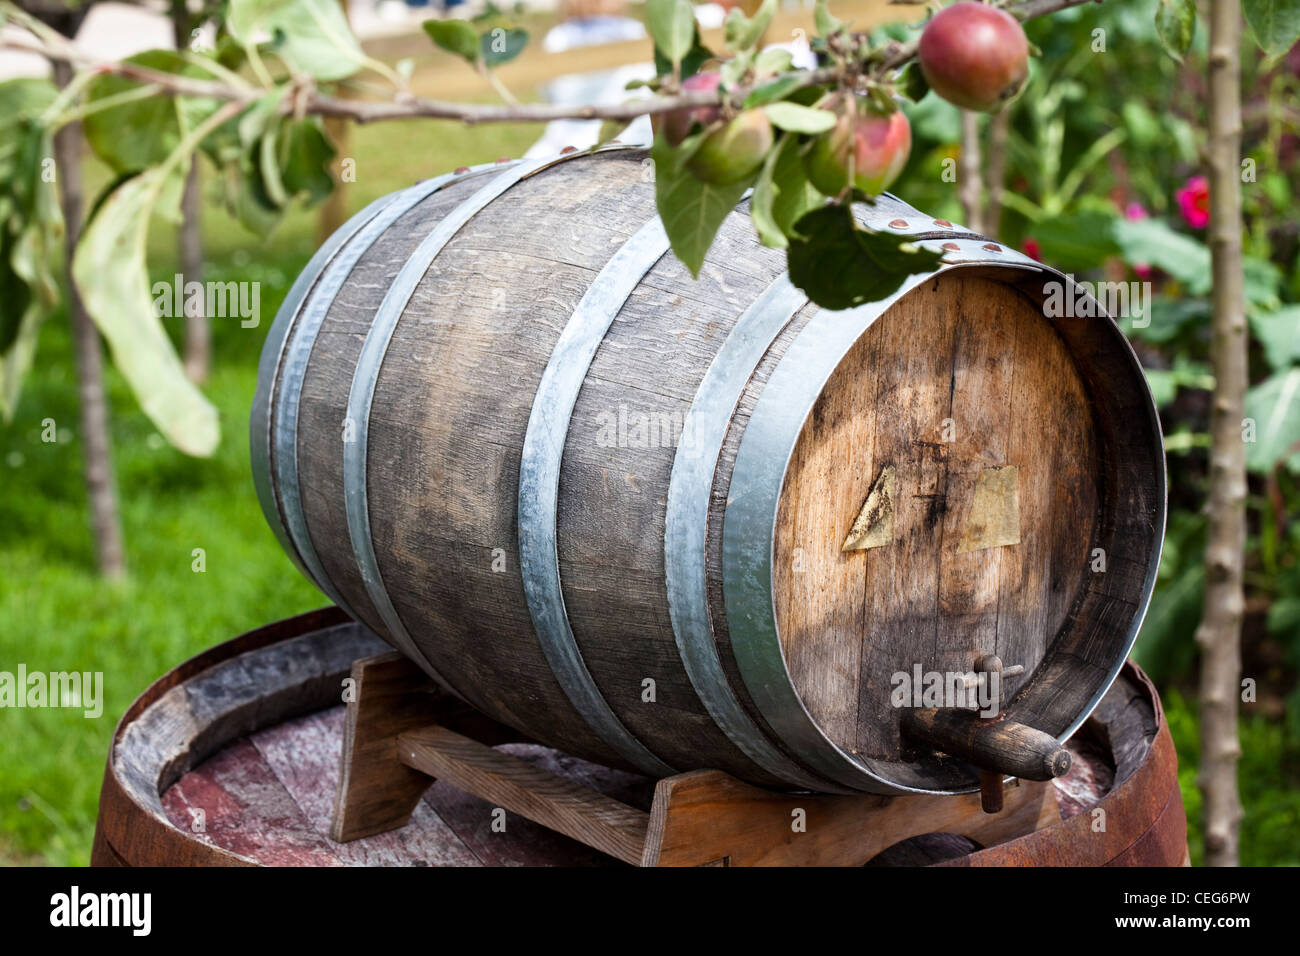 Traditional cider keg under an apple tree in Hampton Court Flower Show Stock Photo